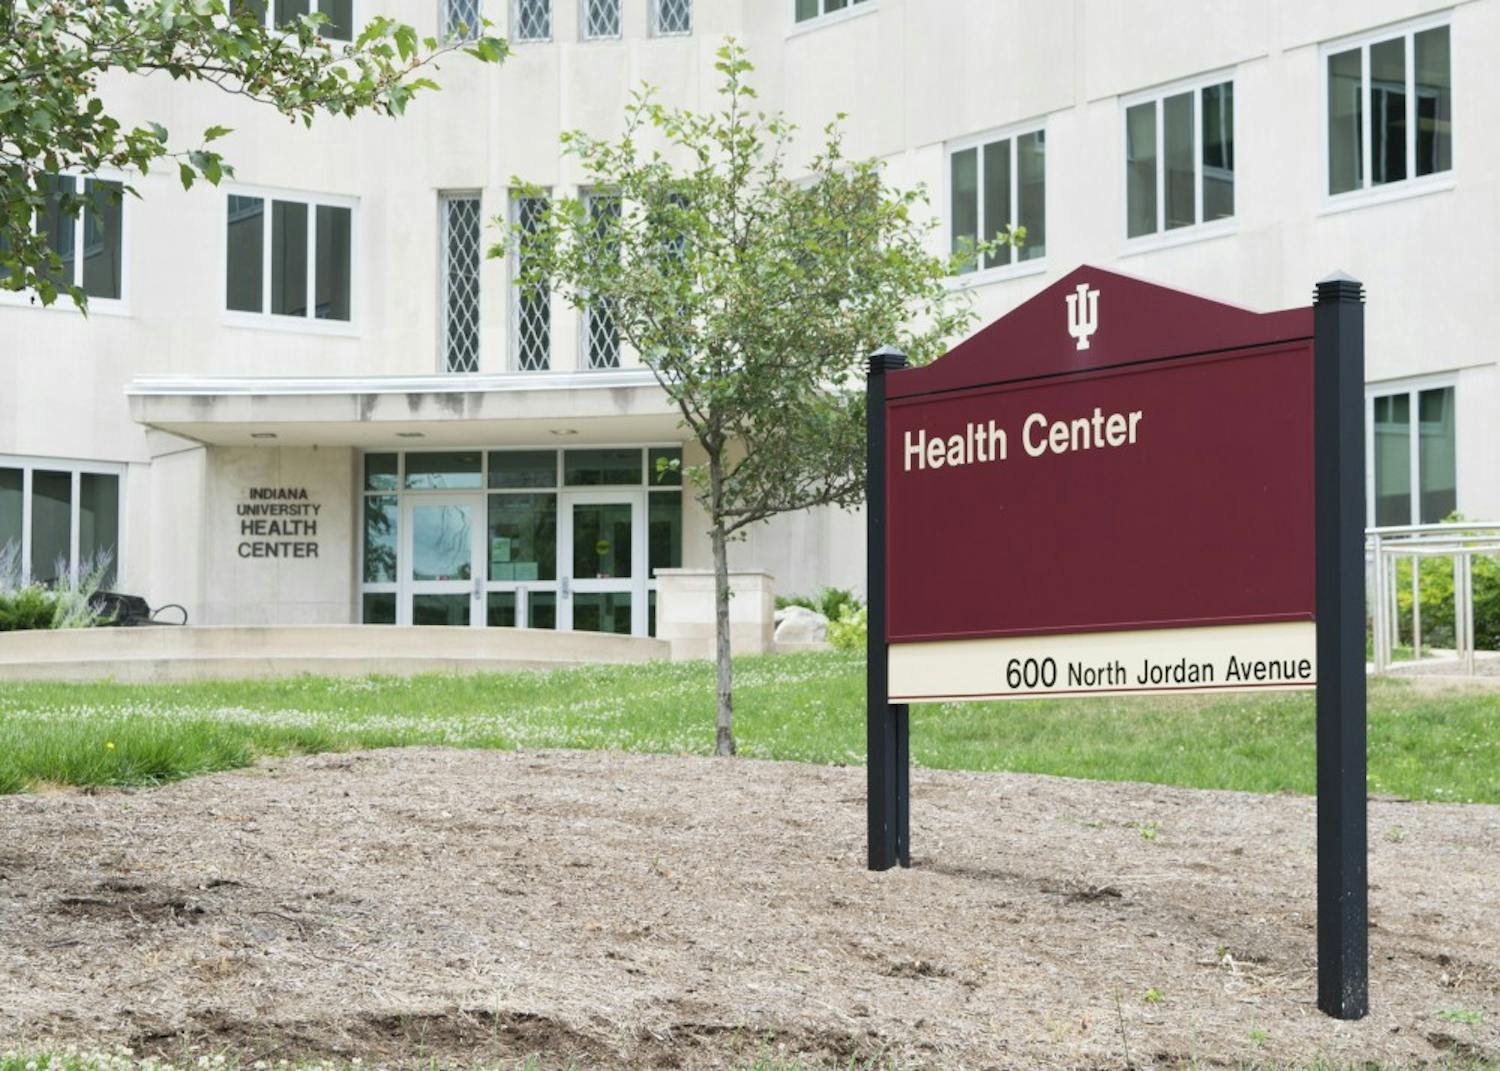 The IU Health Center is located at 10th Street and Jordan Avenue. Campus Action for Democracy organized a town hall Wednesday night to discuss issues students have with the center.